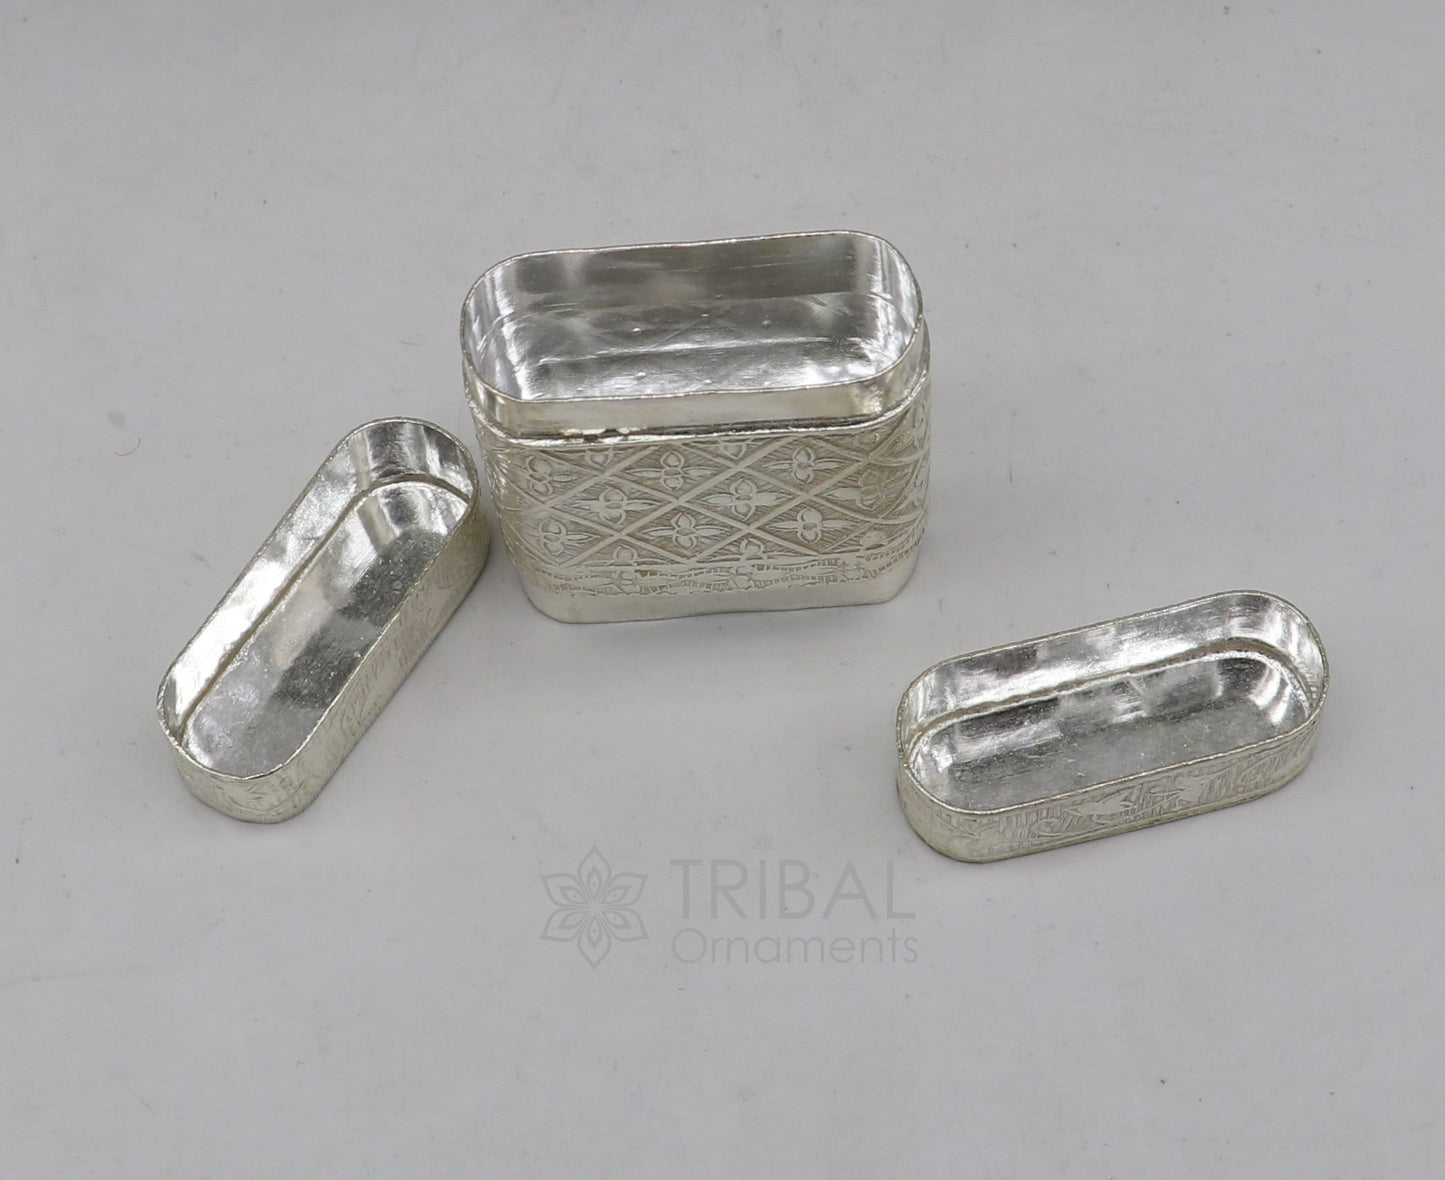 925 sterling silver floral design 2 in1 Royal trinket box, tobacco box, tobacco chuna box, best gifting silver royal article stb812 - TRIBAL ORNAMENTS